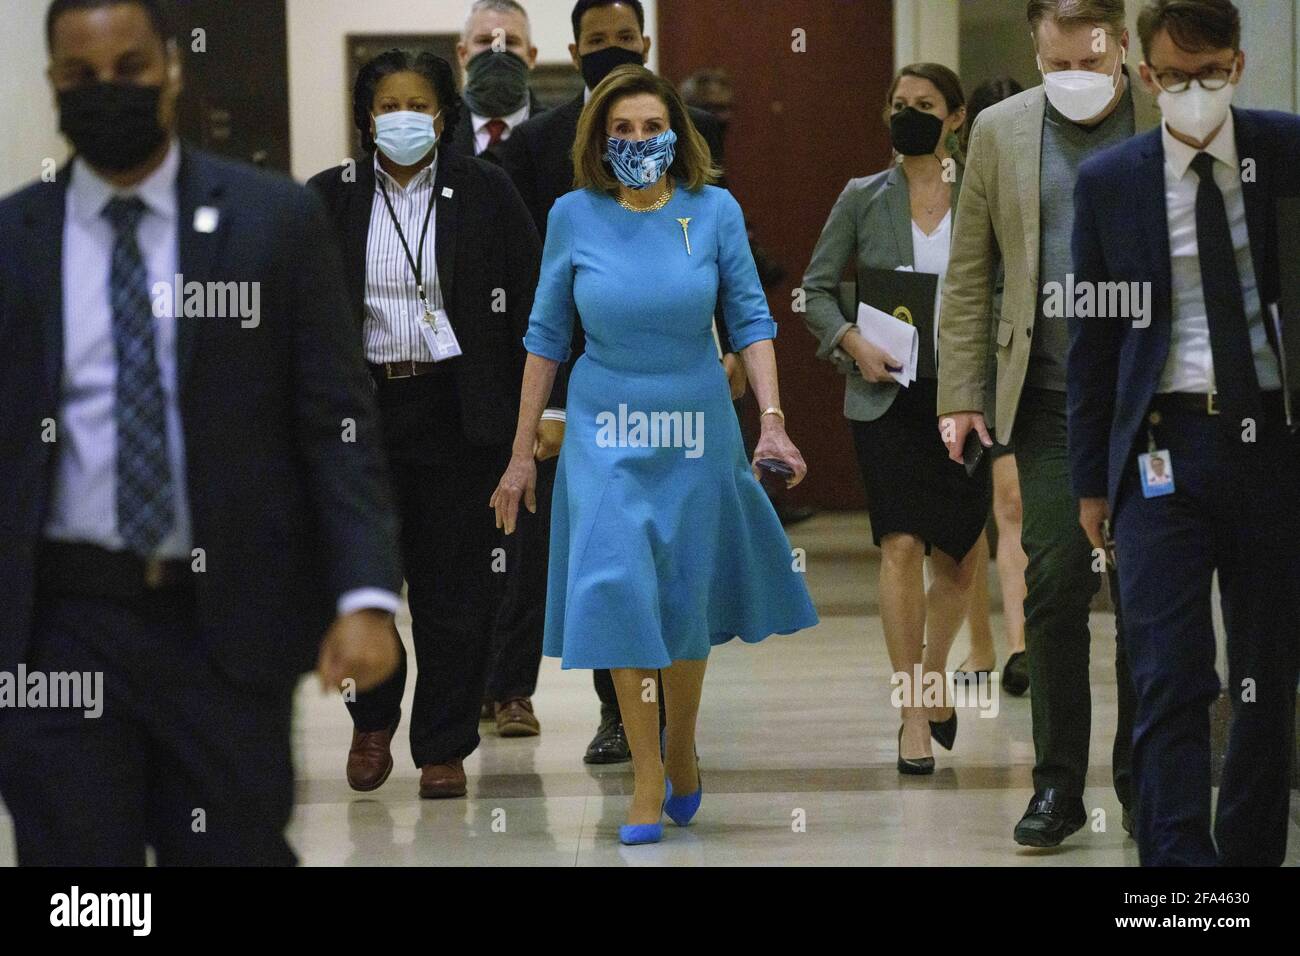 Washington, USA. 22nd Apr, 2021. U.S. House Speaker Nancy Pelosi (C) arrives for a press conference on Capitol Hill in Washington, DC, the United States, April 22, 2021. The U.S. House on Thursday voted to pass a bill that would make Washington, DC the nation's 51st state, a Democratic priority that will face an uphill battle in the Senate for final passage even as the party controls both chambers of Congress. Credit: Ting Shen/Xinhua/Alamy Live News Stock Photo